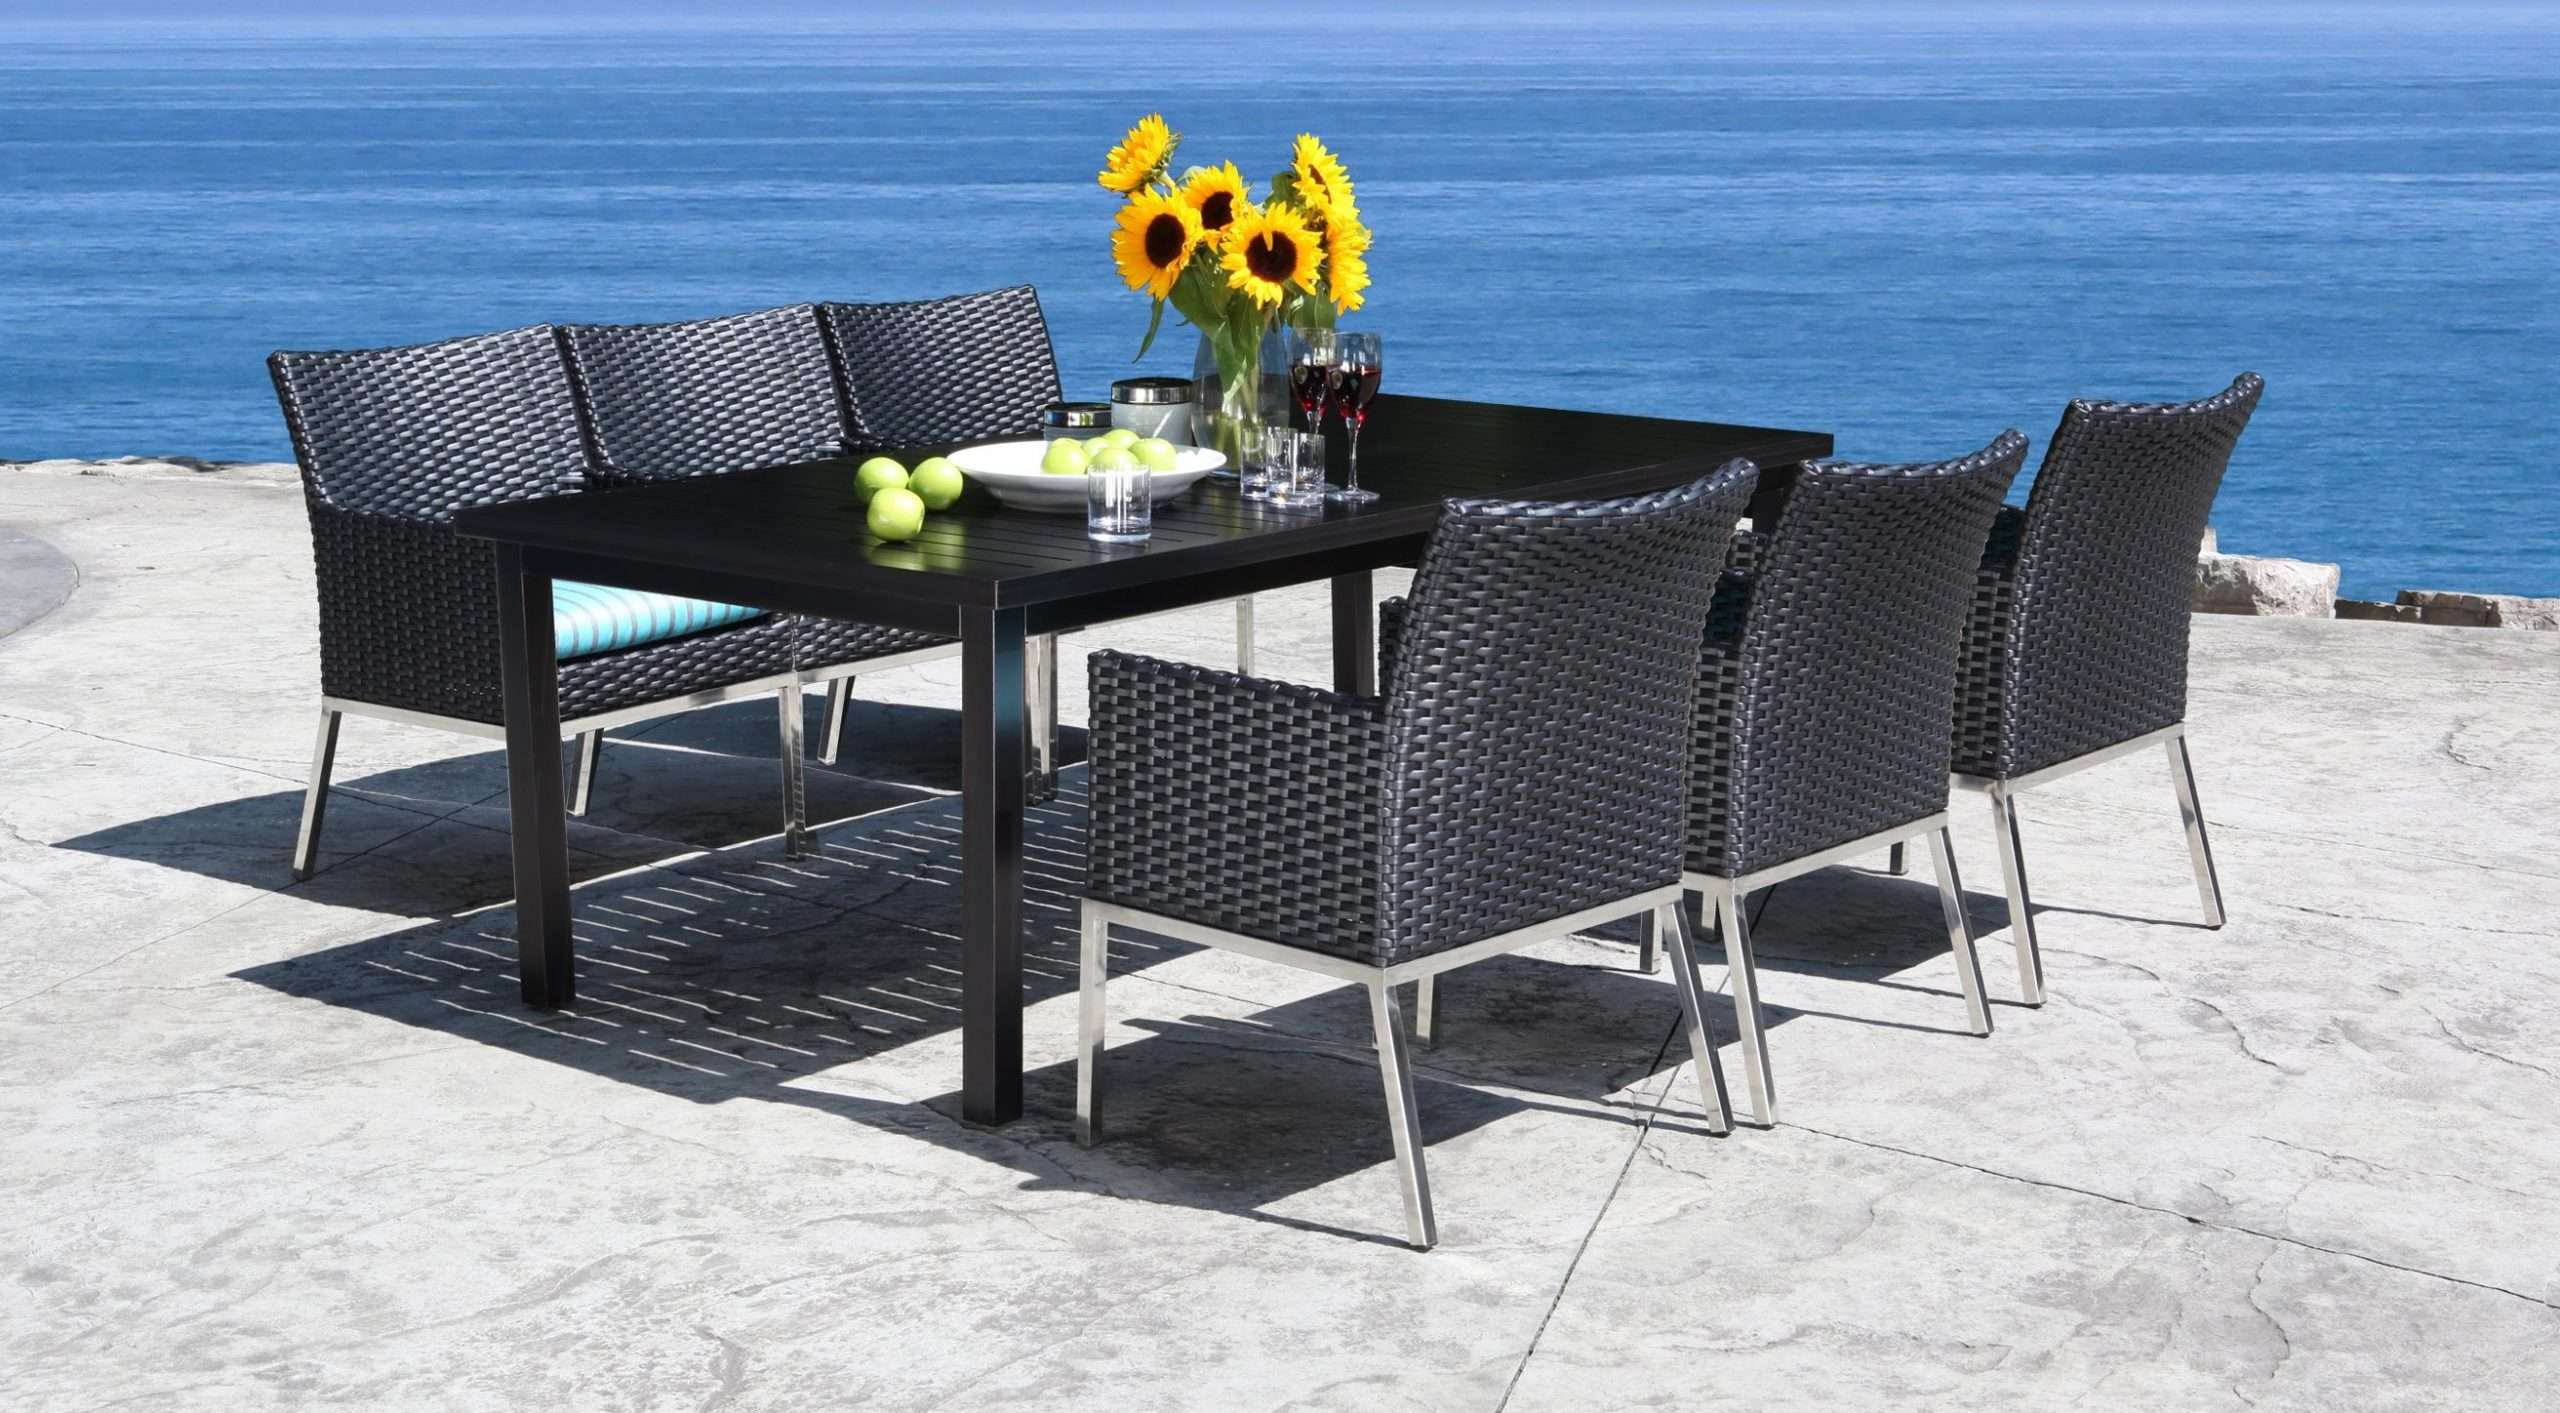 Cleaning Your Patio Furniture